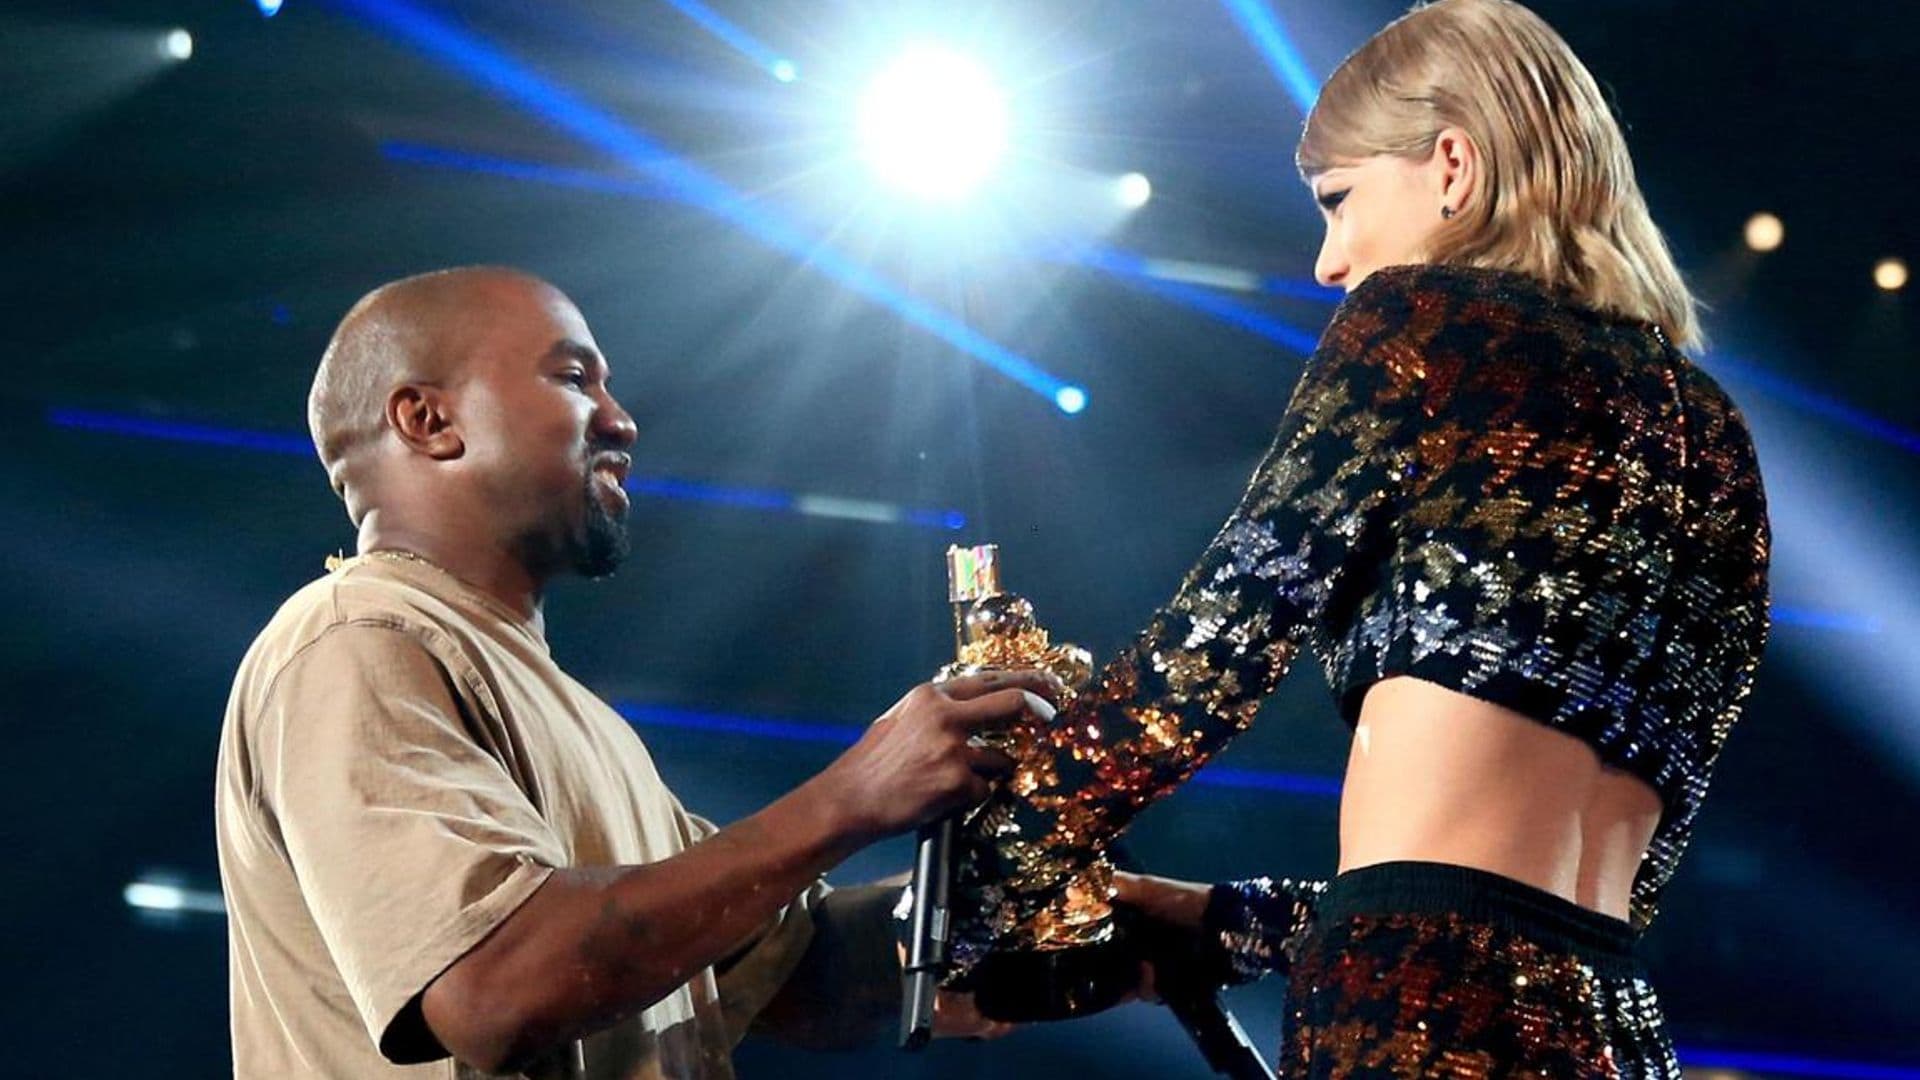 Kanye West keeps his promise to Taylor Swift and the music industry